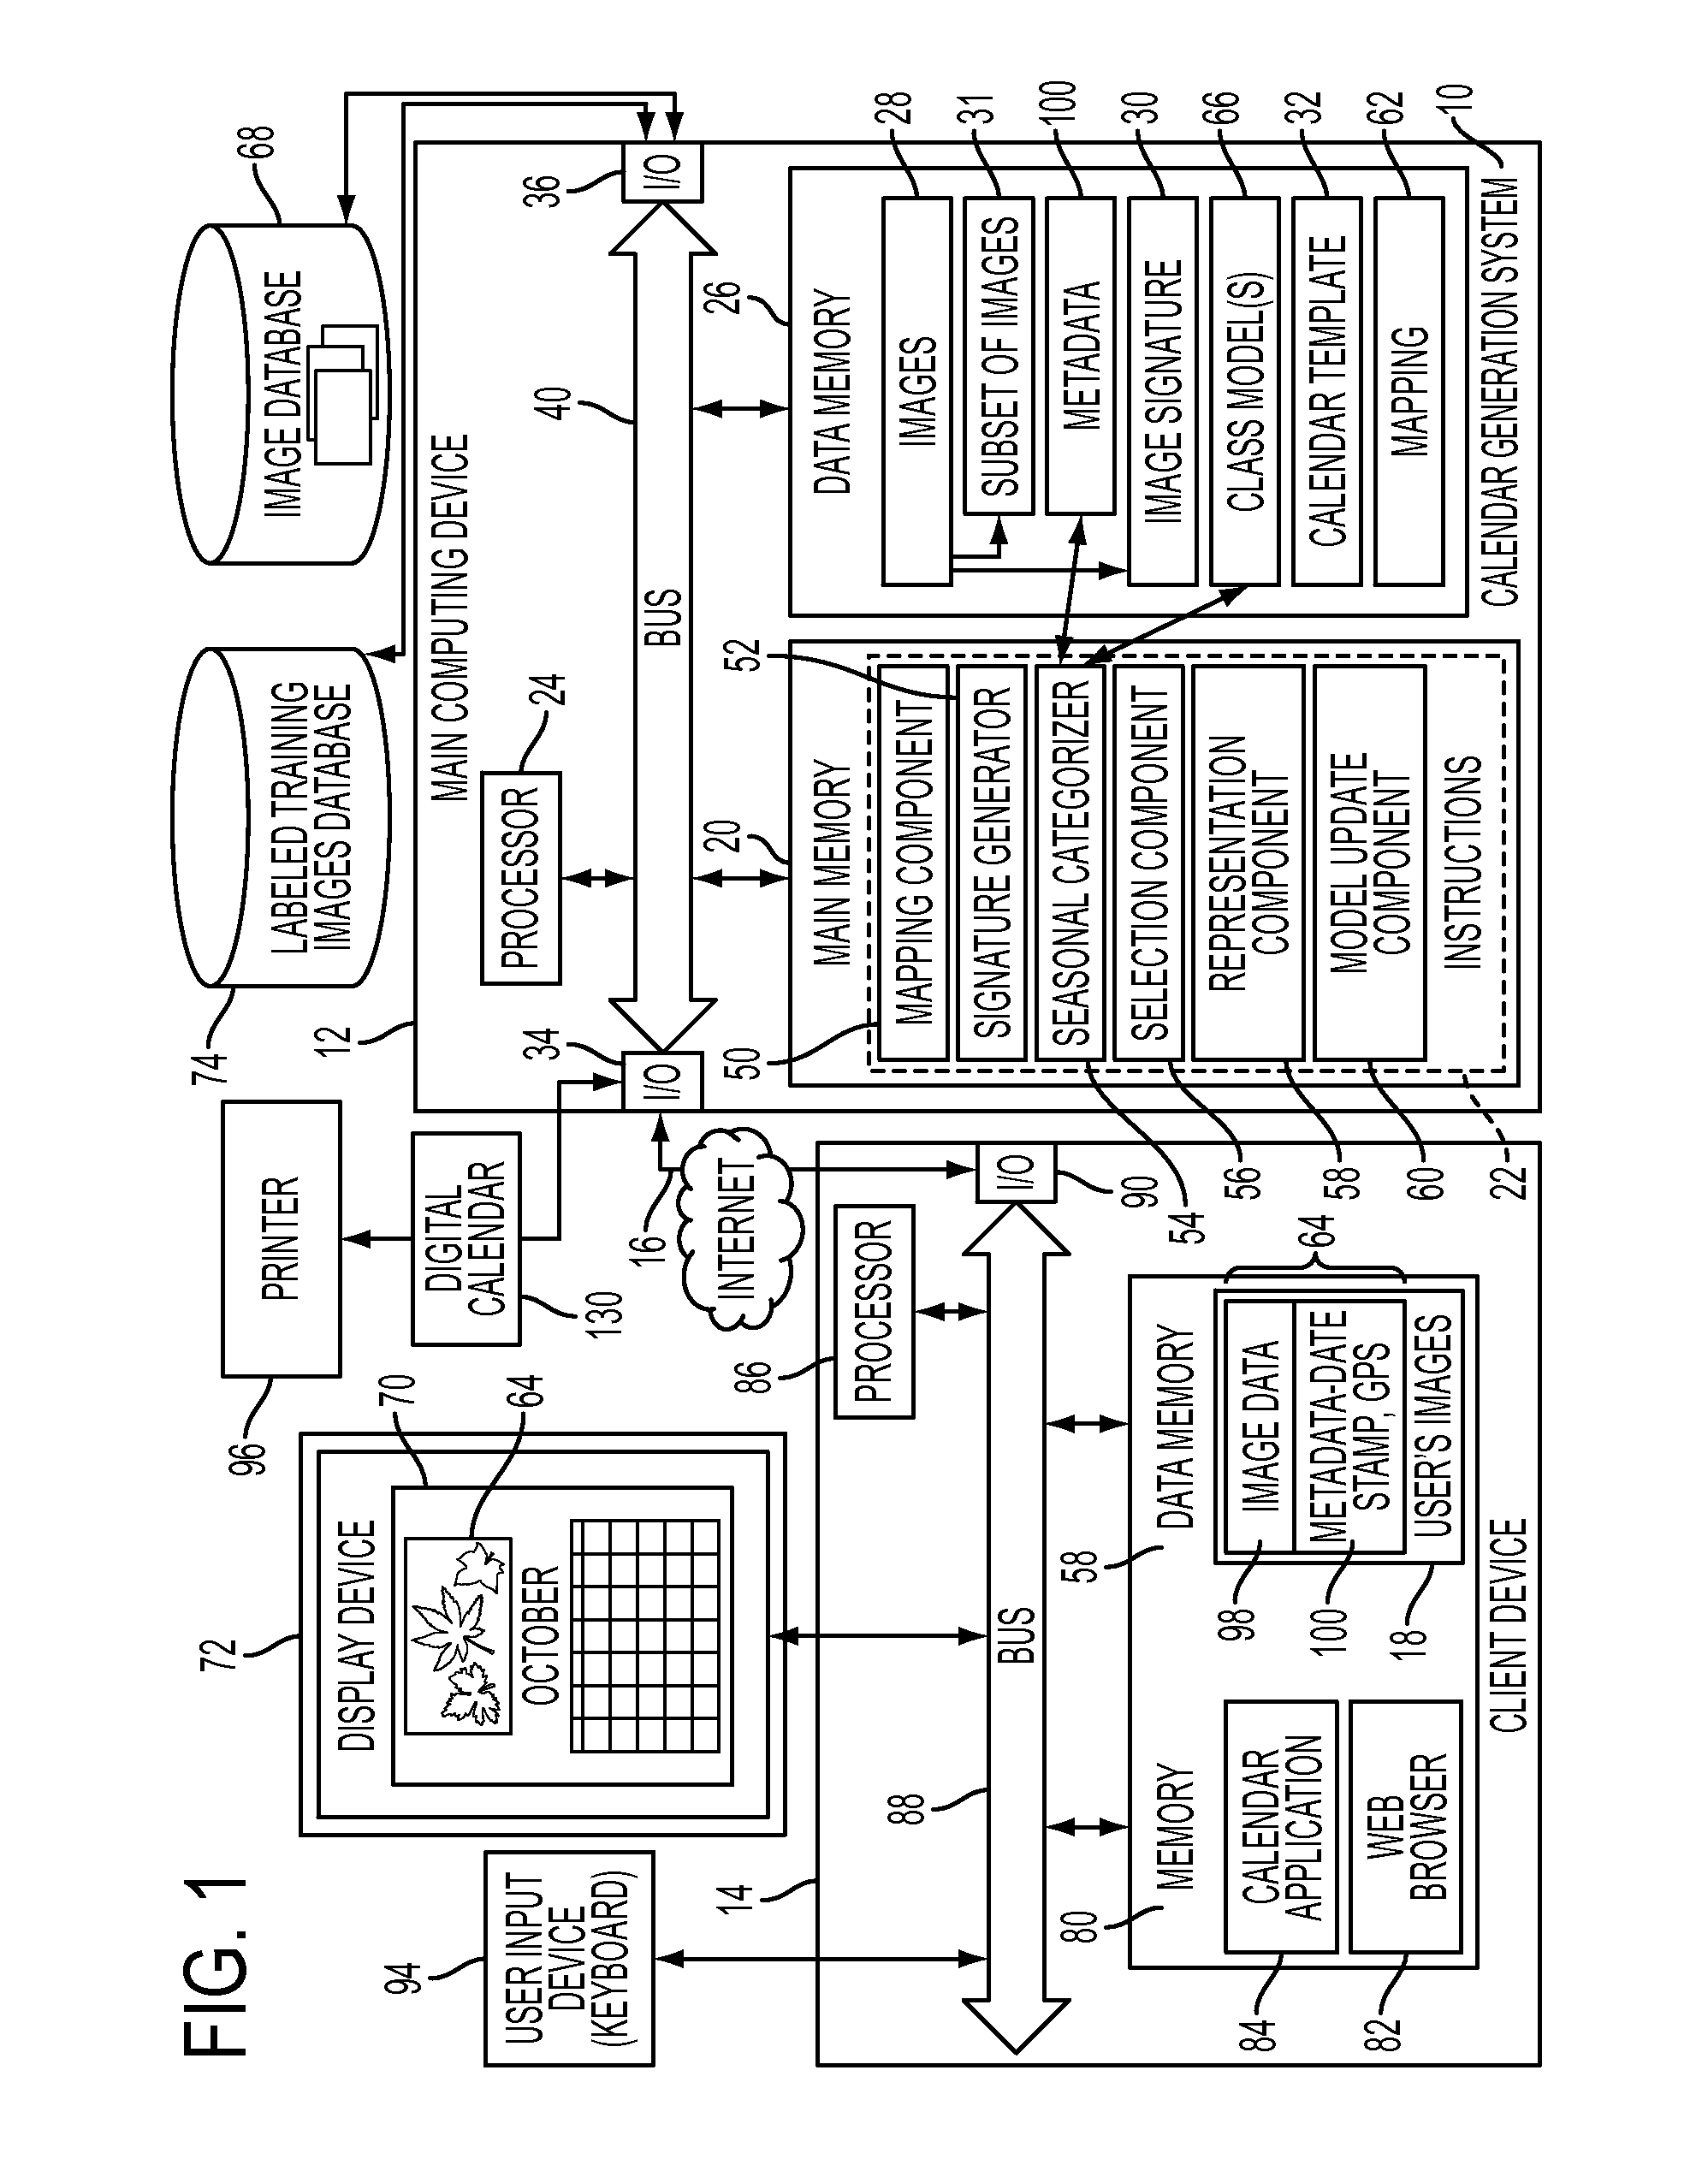 Personalized photo calendar generation system and method